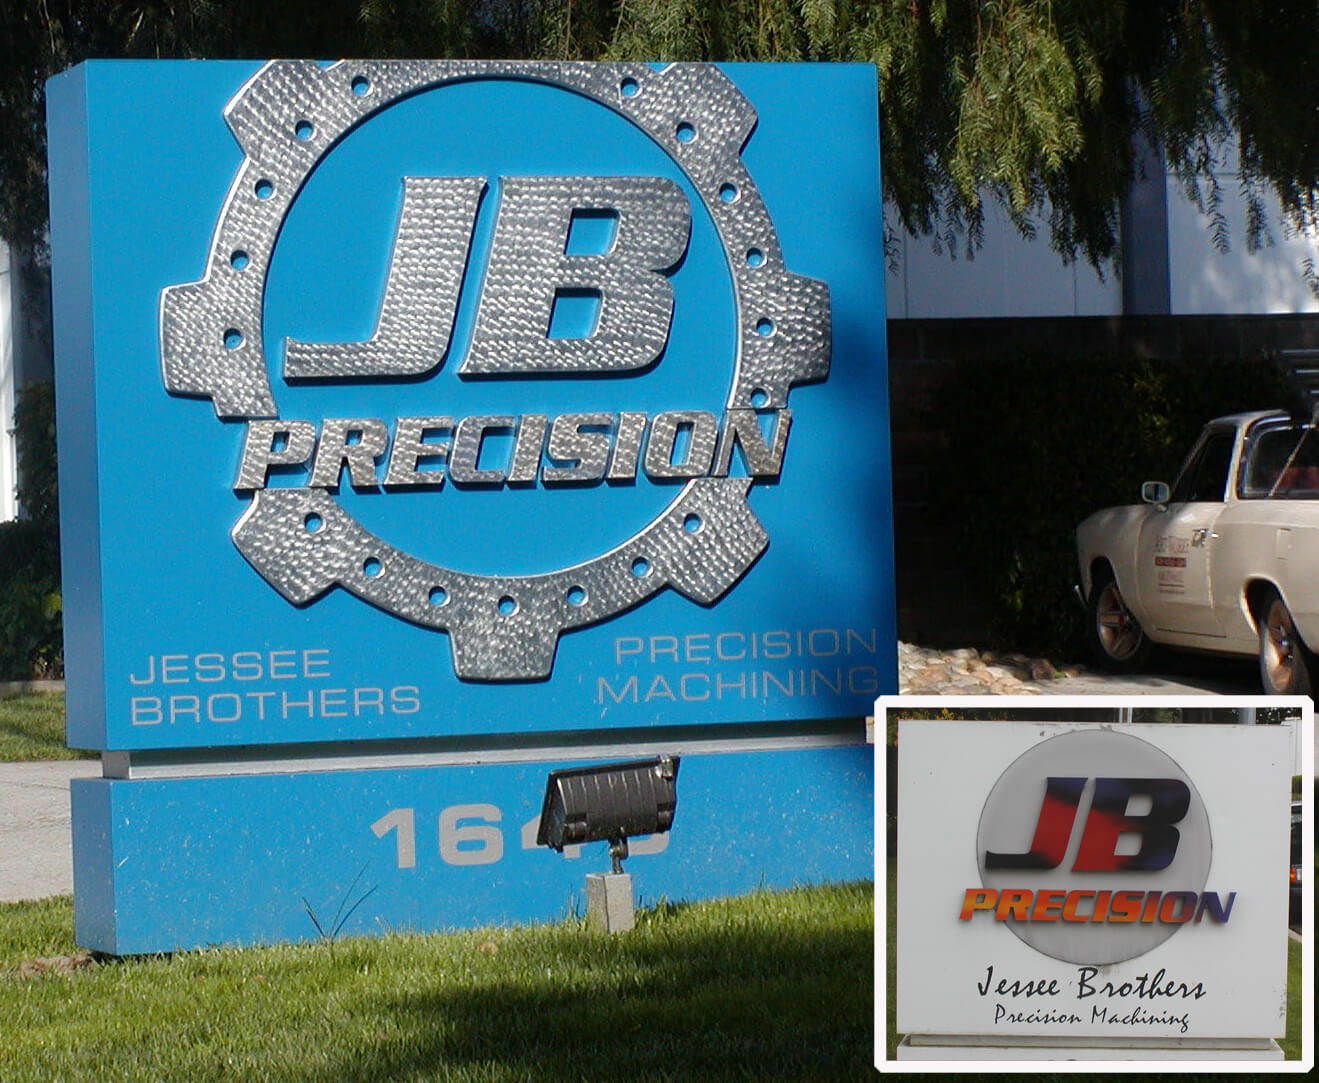 Campbell dimensional letters monument sign JD precision machining